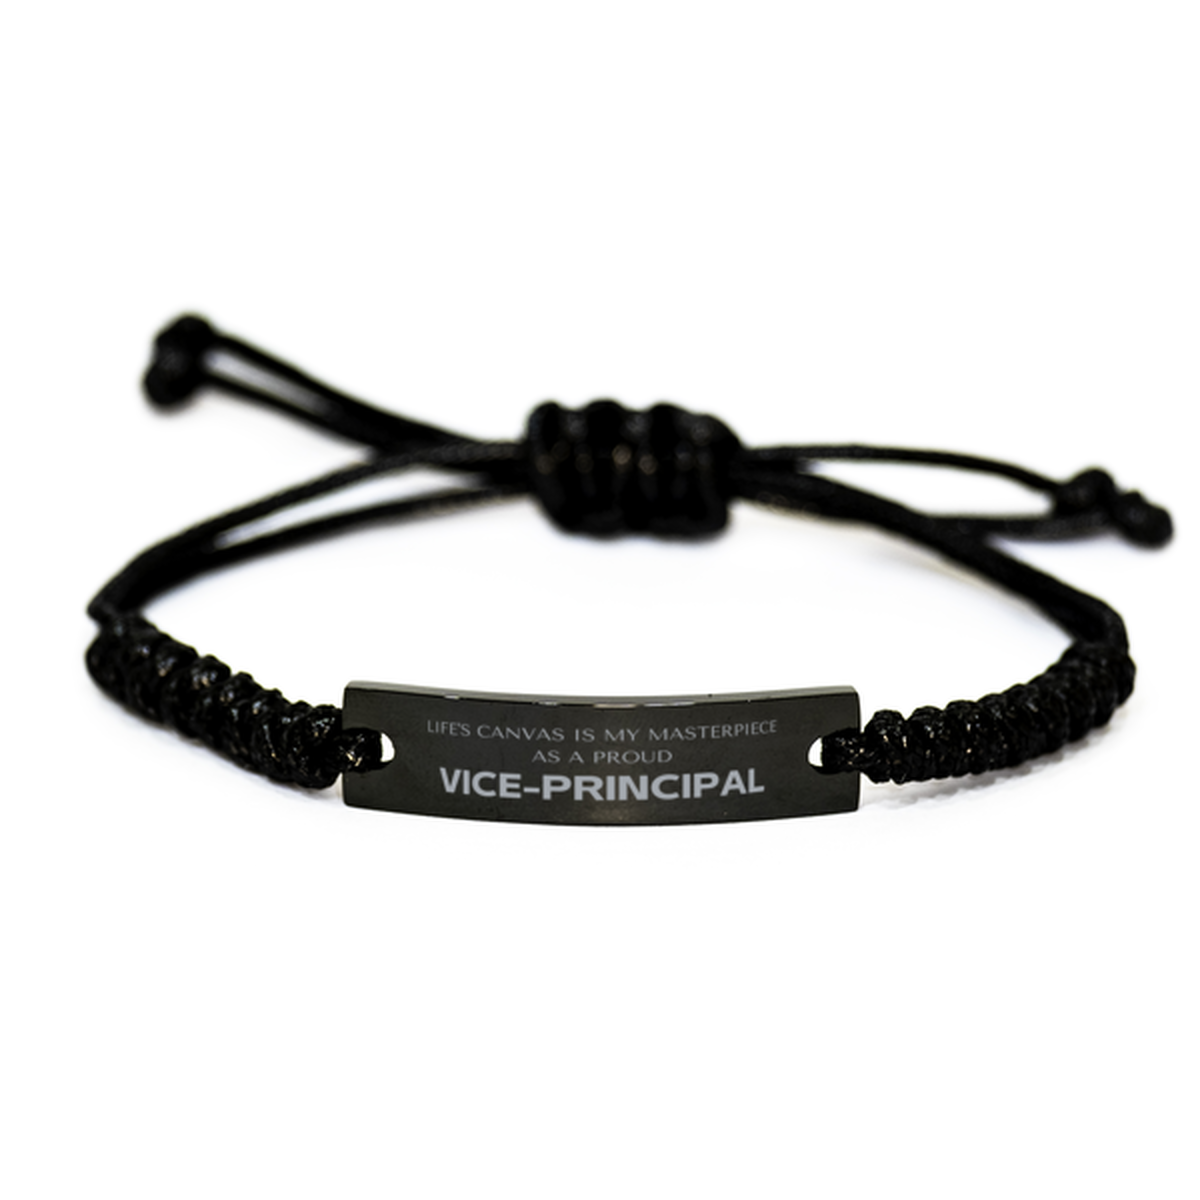 Proud Vice-principal Gifts, Life's canvas is my masterpiece, Epic Birthday Christmas Unique Black Rope Bracelet For Vice-principal, Coworkers, Men, Women, Friends